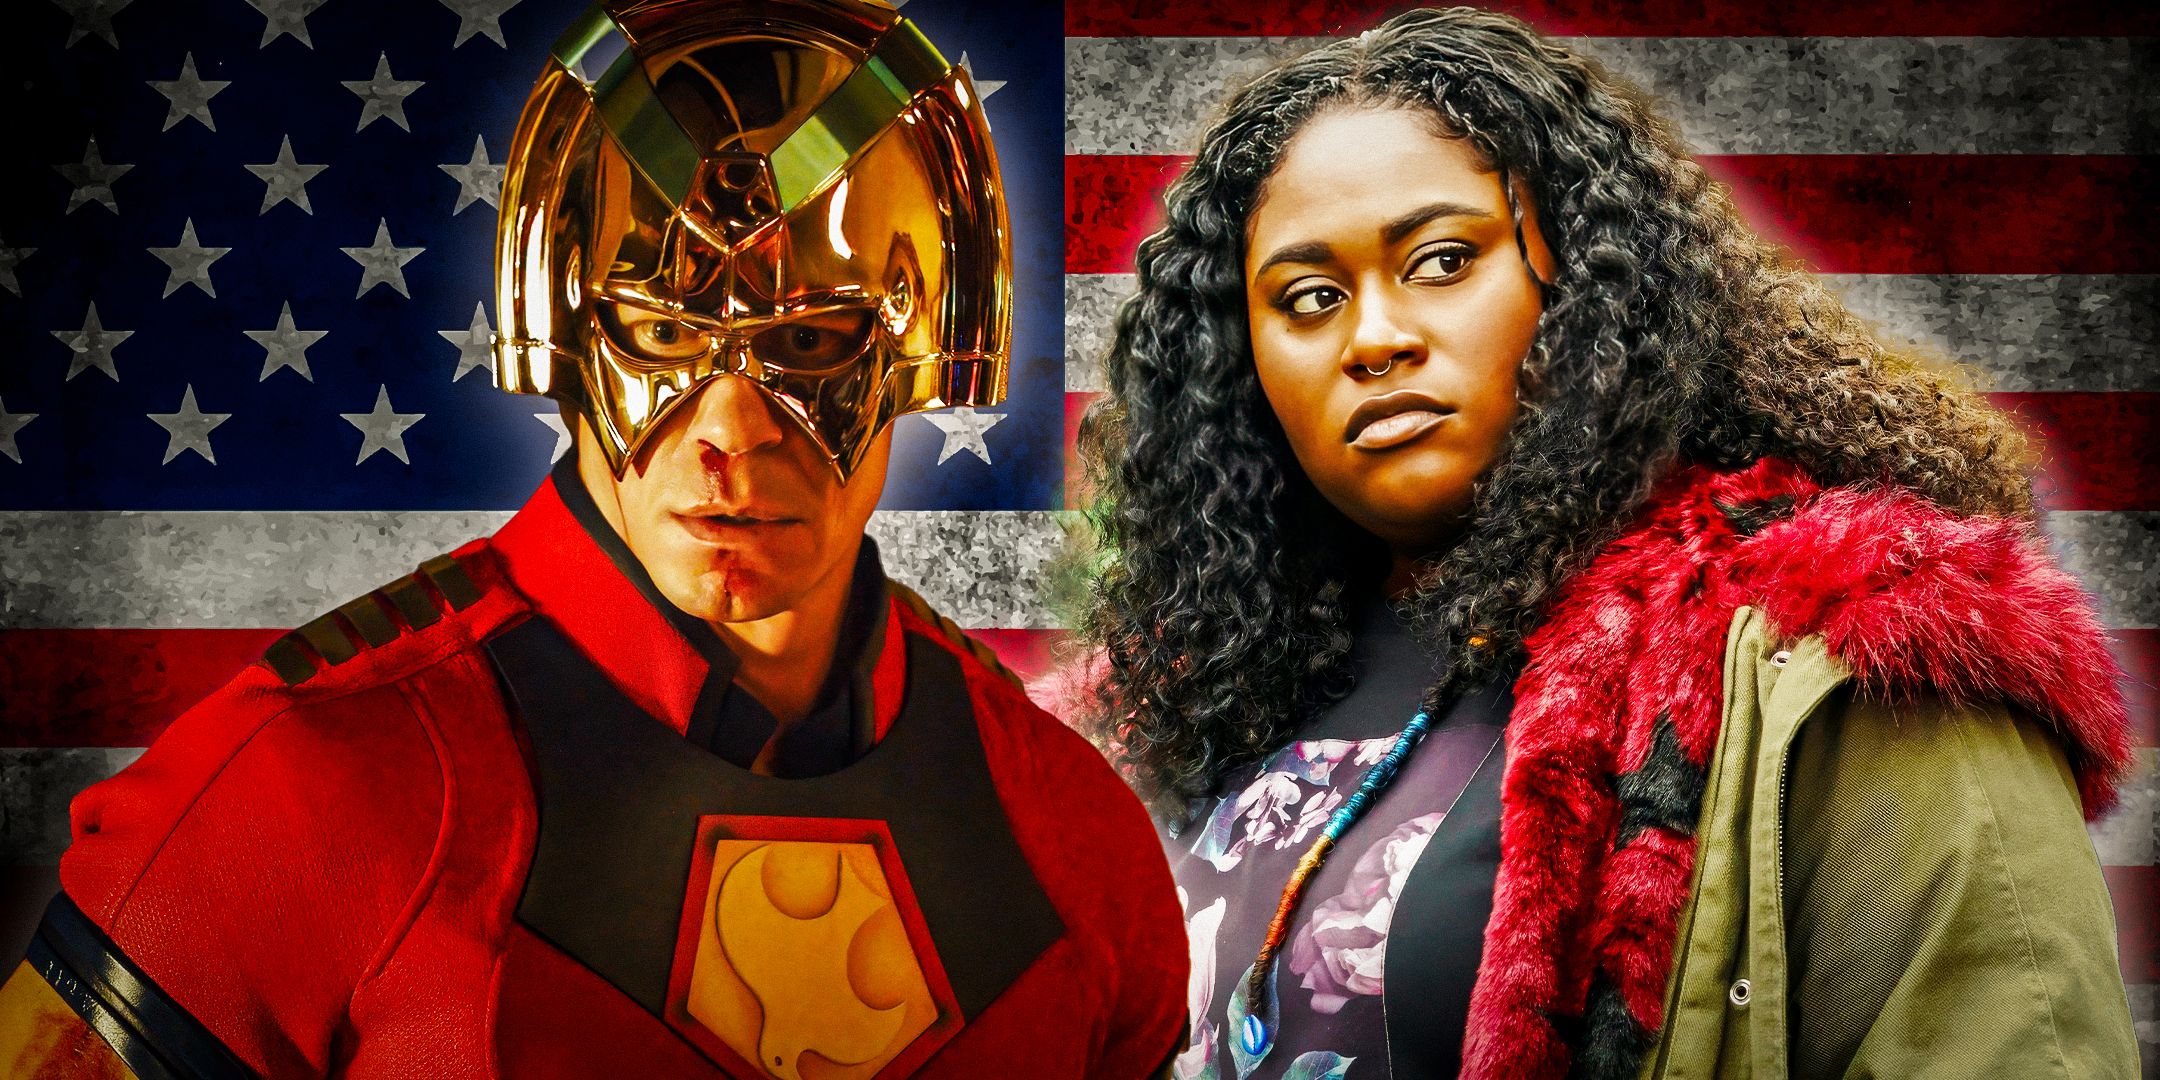 John Cena As Peacemaker In Full Costume With Danielle Brooks as Leota Adebayo Against The Backdrop Of An American Flag